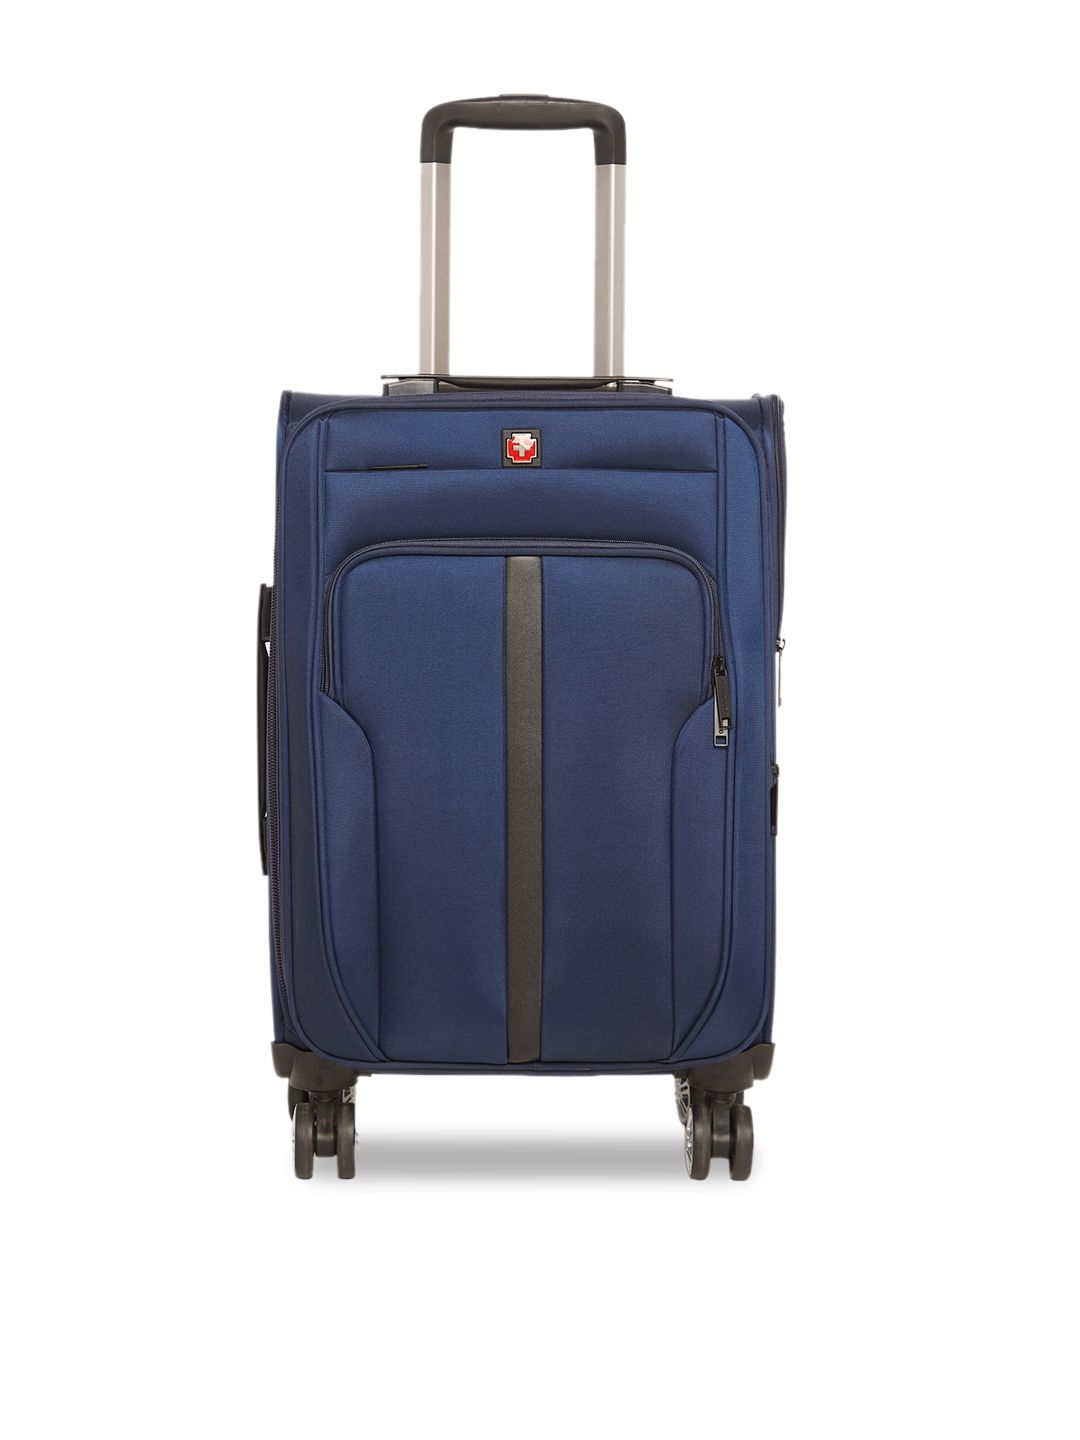 SWISS BRAND Navy Blue Solid Grande Soft-Sided Cabin Trolley Suitcase Price in India